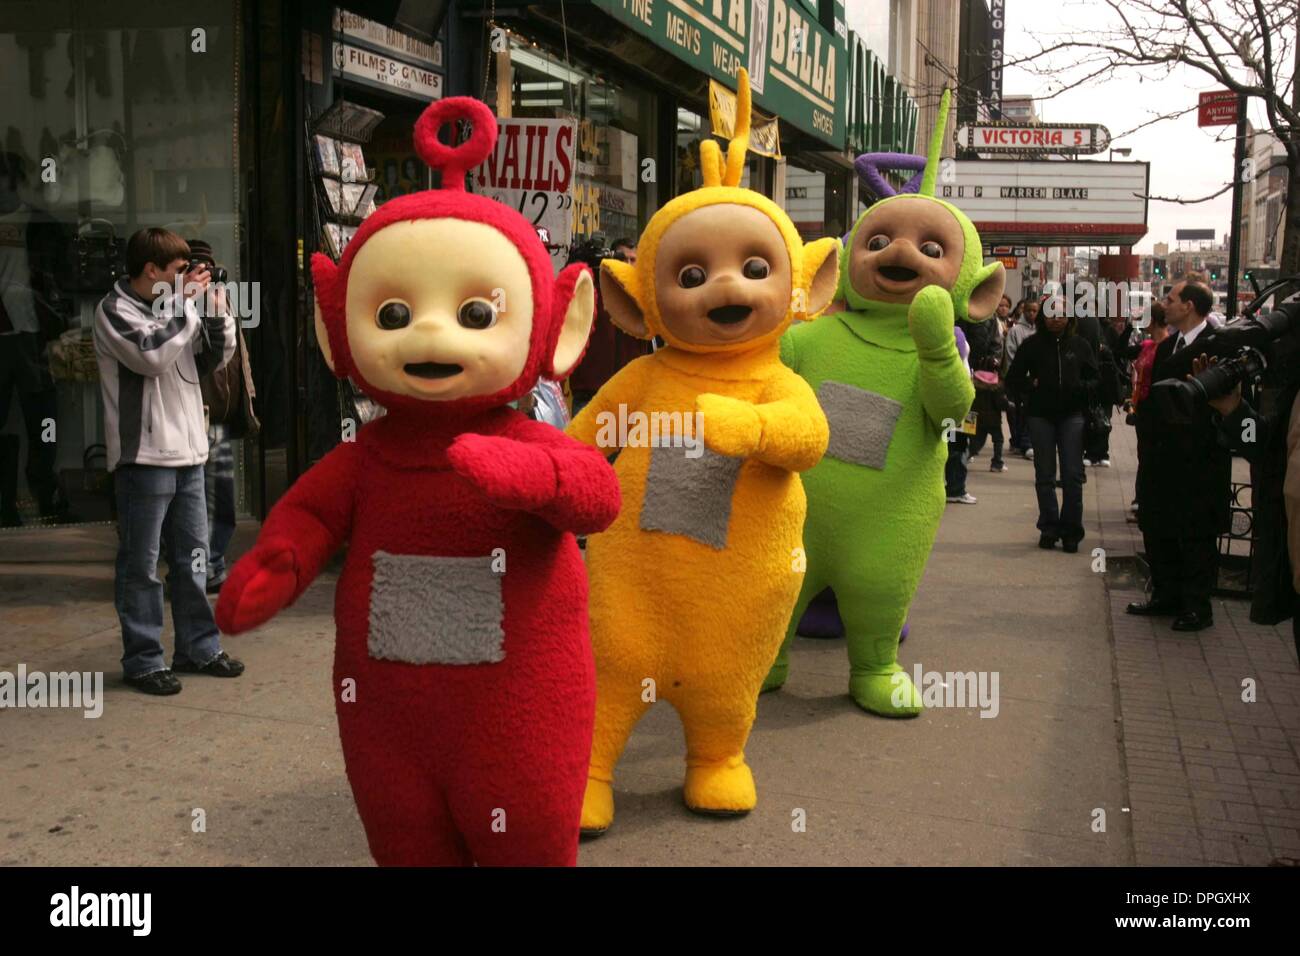 Mar. 25, 2006 - New York, New York, U.S. - THE TELETUBBIES KICK OFF  IT'S GLOBAL 10 YEAR CELEBRATION AND THEIR FIRST VISIT TO AMERICAN SOIL WITH A WEEKLONG TOUR OF NEW YORK New York LANDMARKS, STARTING WITH A TRIP TO THE WORLD FAMOUS APOLLO THEATRE   .HARLEM USA  03-26-2007.       2007.THE TELETUBBIES .K52334RM.(Credit Image: © Rick Mackler/Globe Photos/ZUMAPRESS.com) Stock Photo